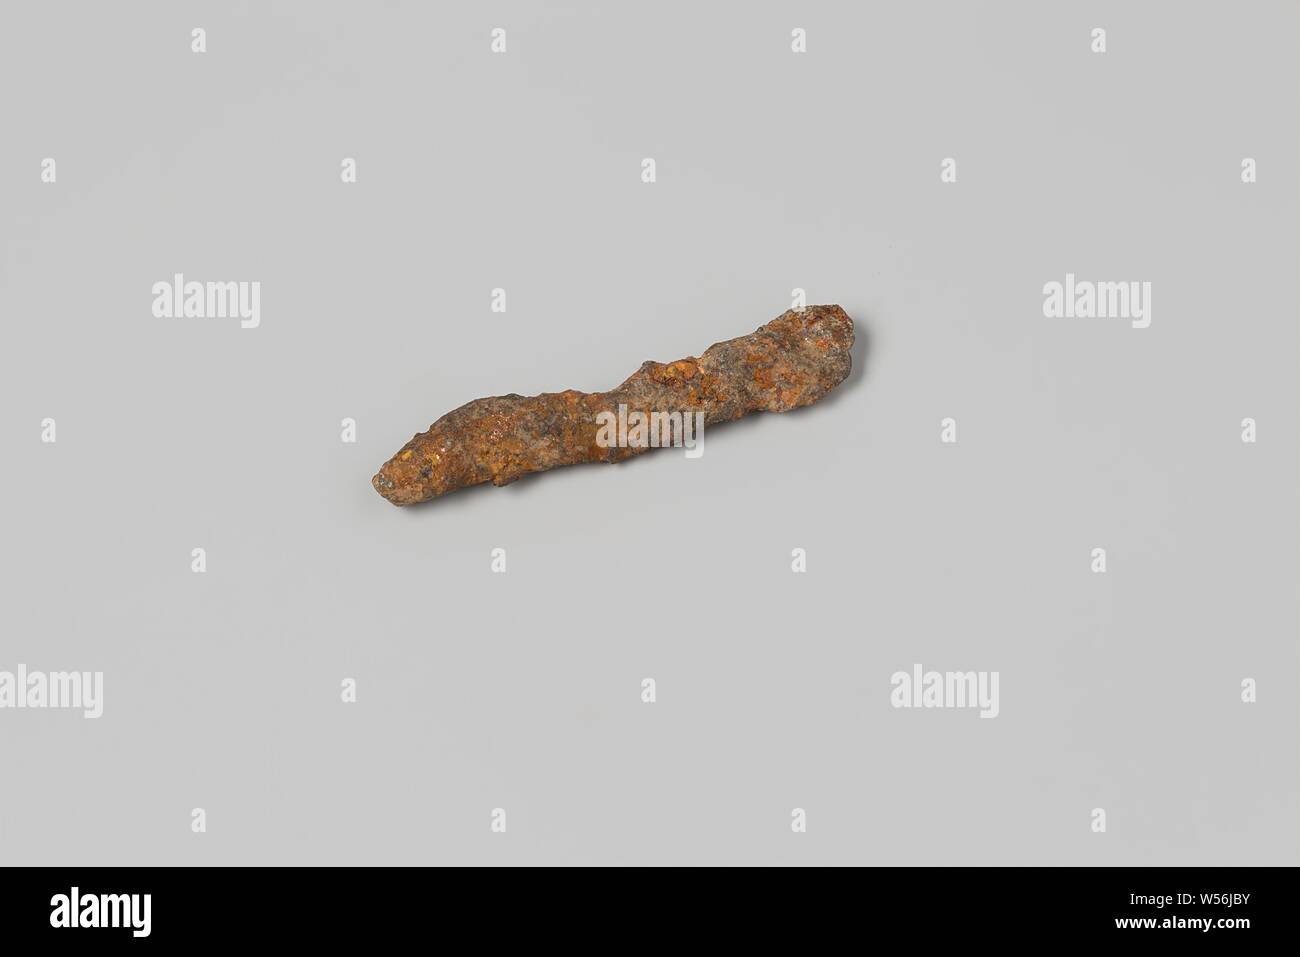 Shipwreck find from the wreck of the East Indies ship Hollandia, Parts of artifacts, eroded fragments: materials, lead, Annet, Dutch East India Company, Hollandia (ship), anonymous, Netherlands, 1700 - in or before 13-Aug-1743, h 5 cm × d 1 cm Stock Photo